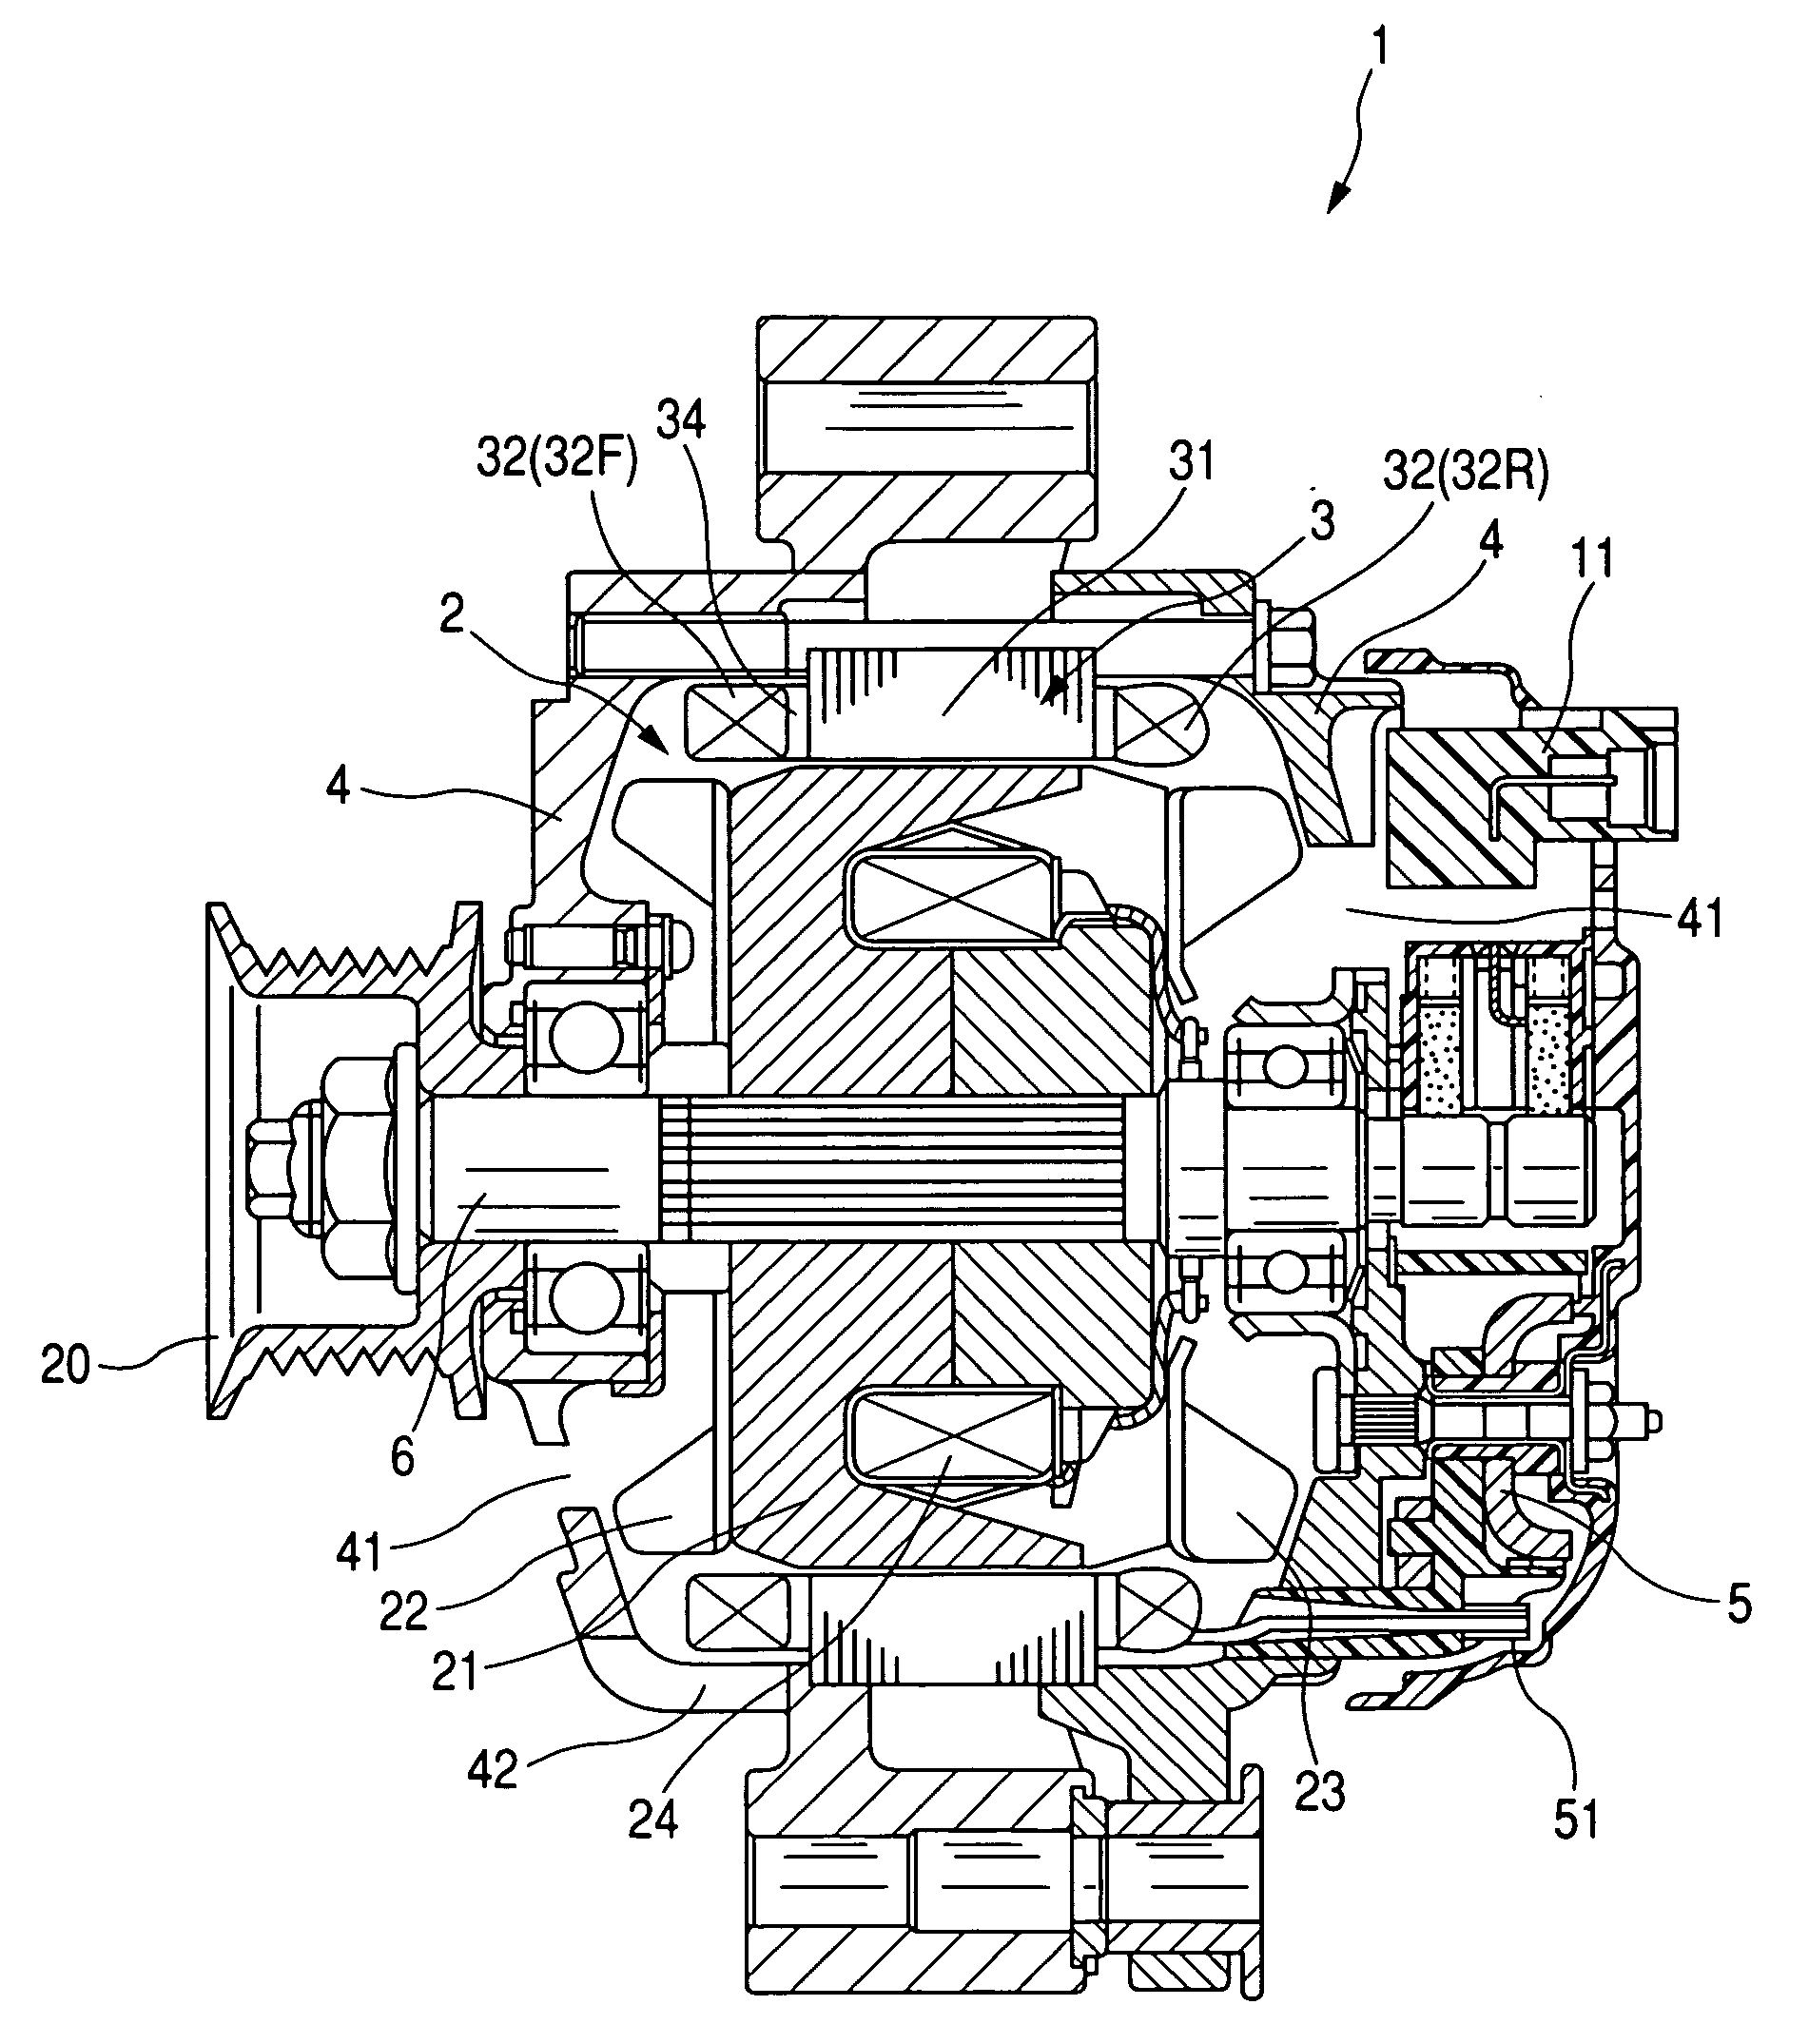 Rotary electric machine for vehicles